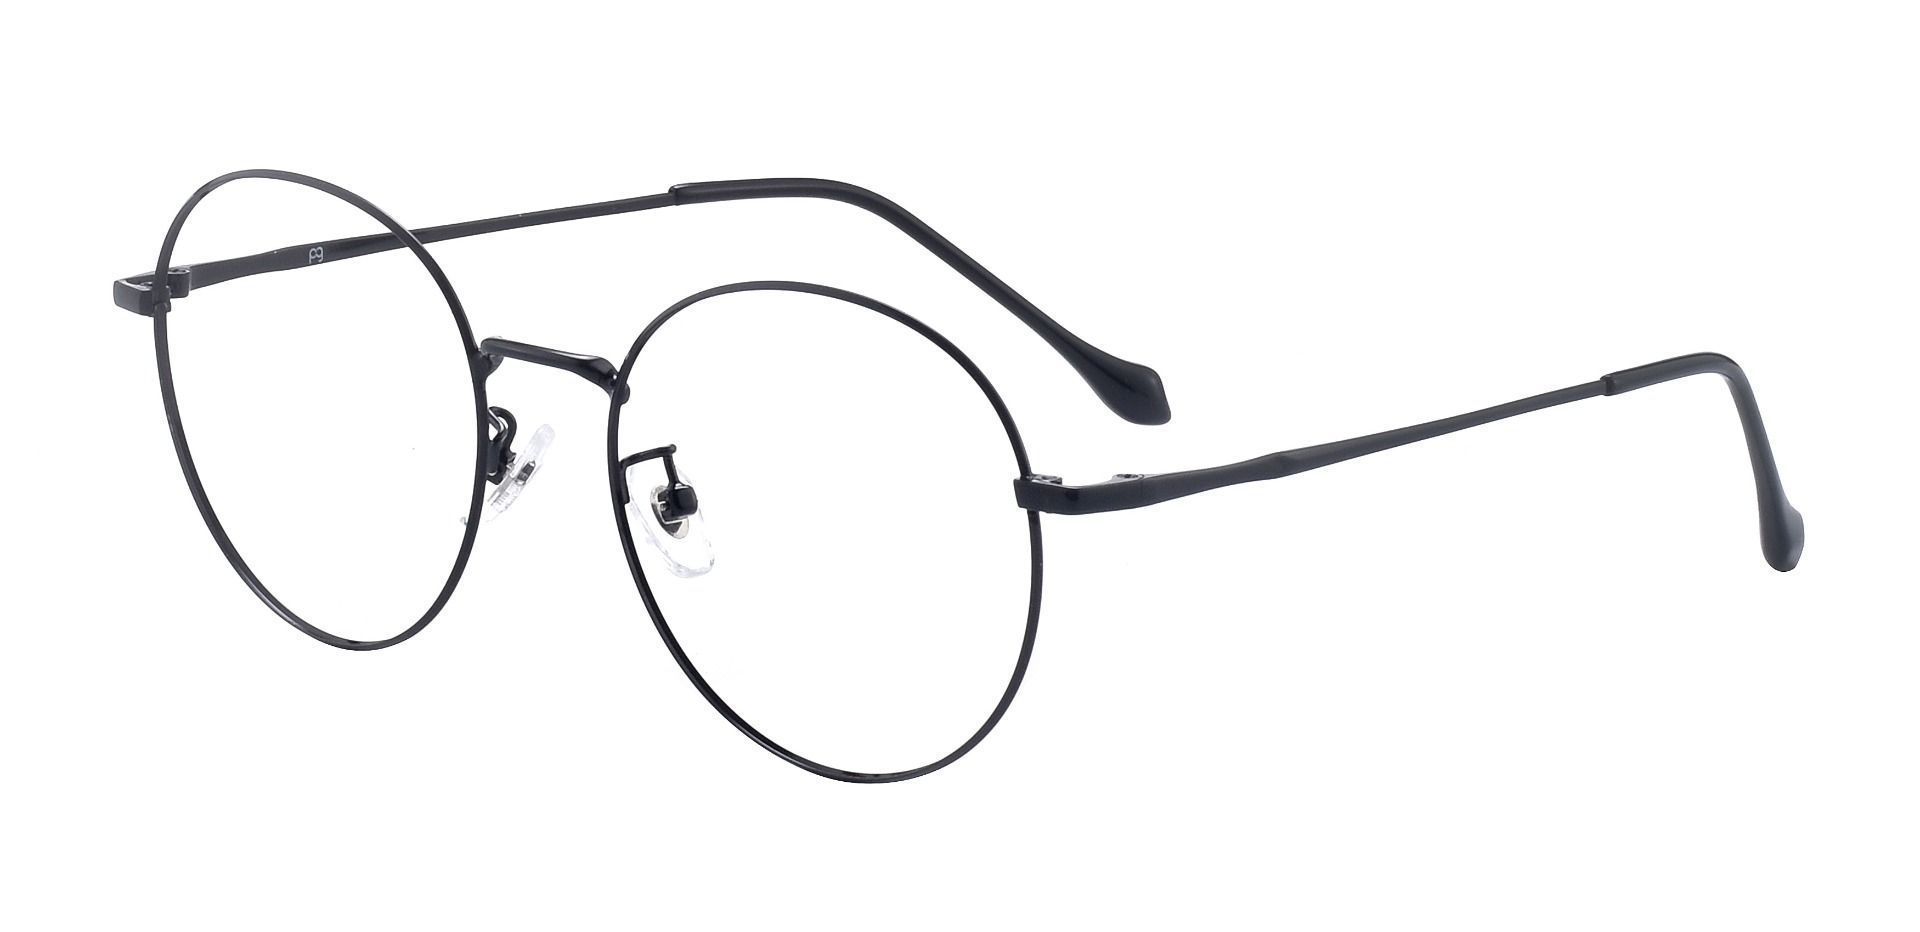 Silas Round Lined Bifocal Glasses - Black